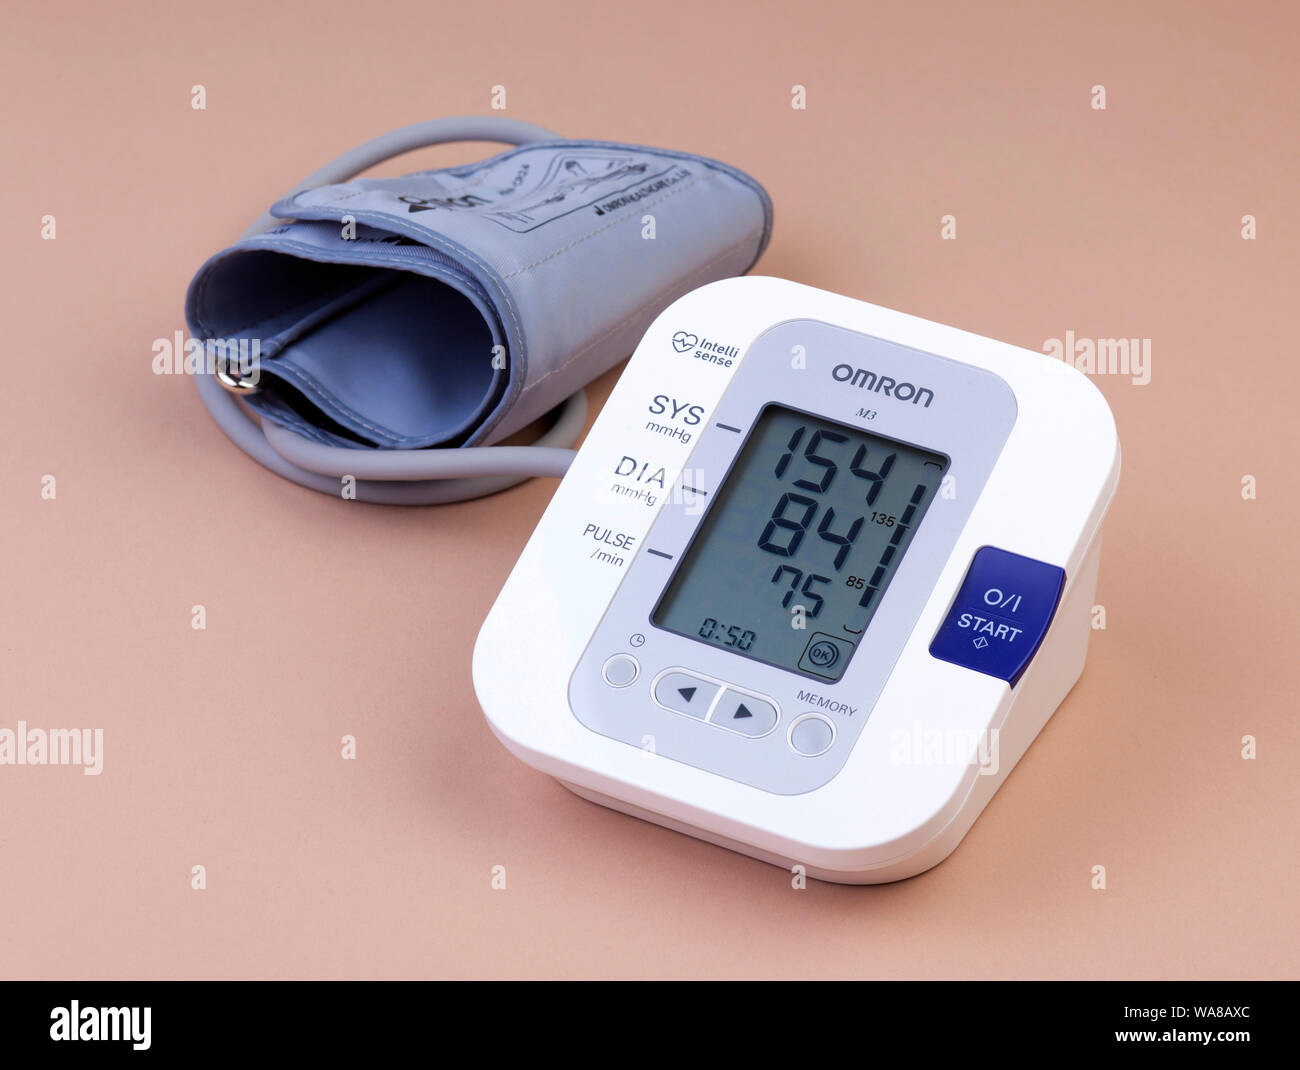 Omron Blood Pressure Monitor for Obese People